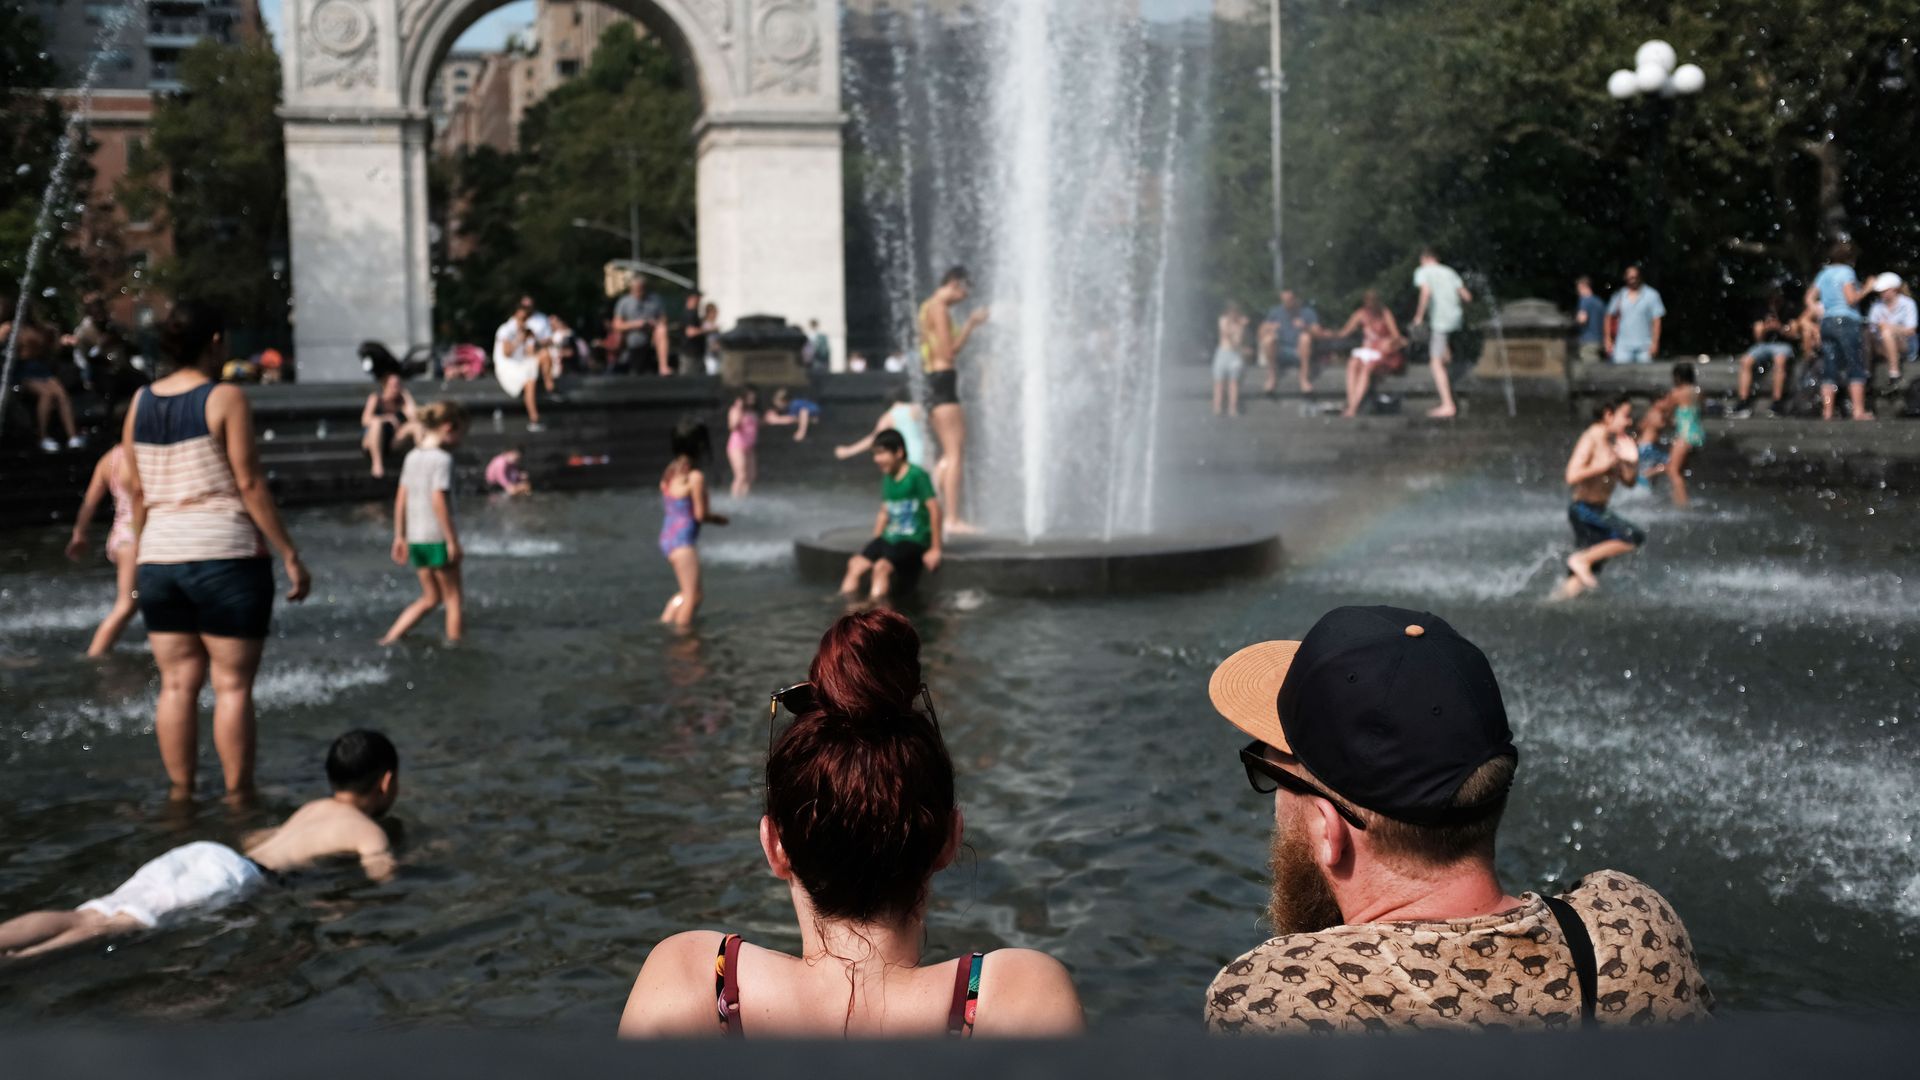 People try and stay cool in the fountain in Washington Square Park during the start of heat wave across the U.S. on July 19.